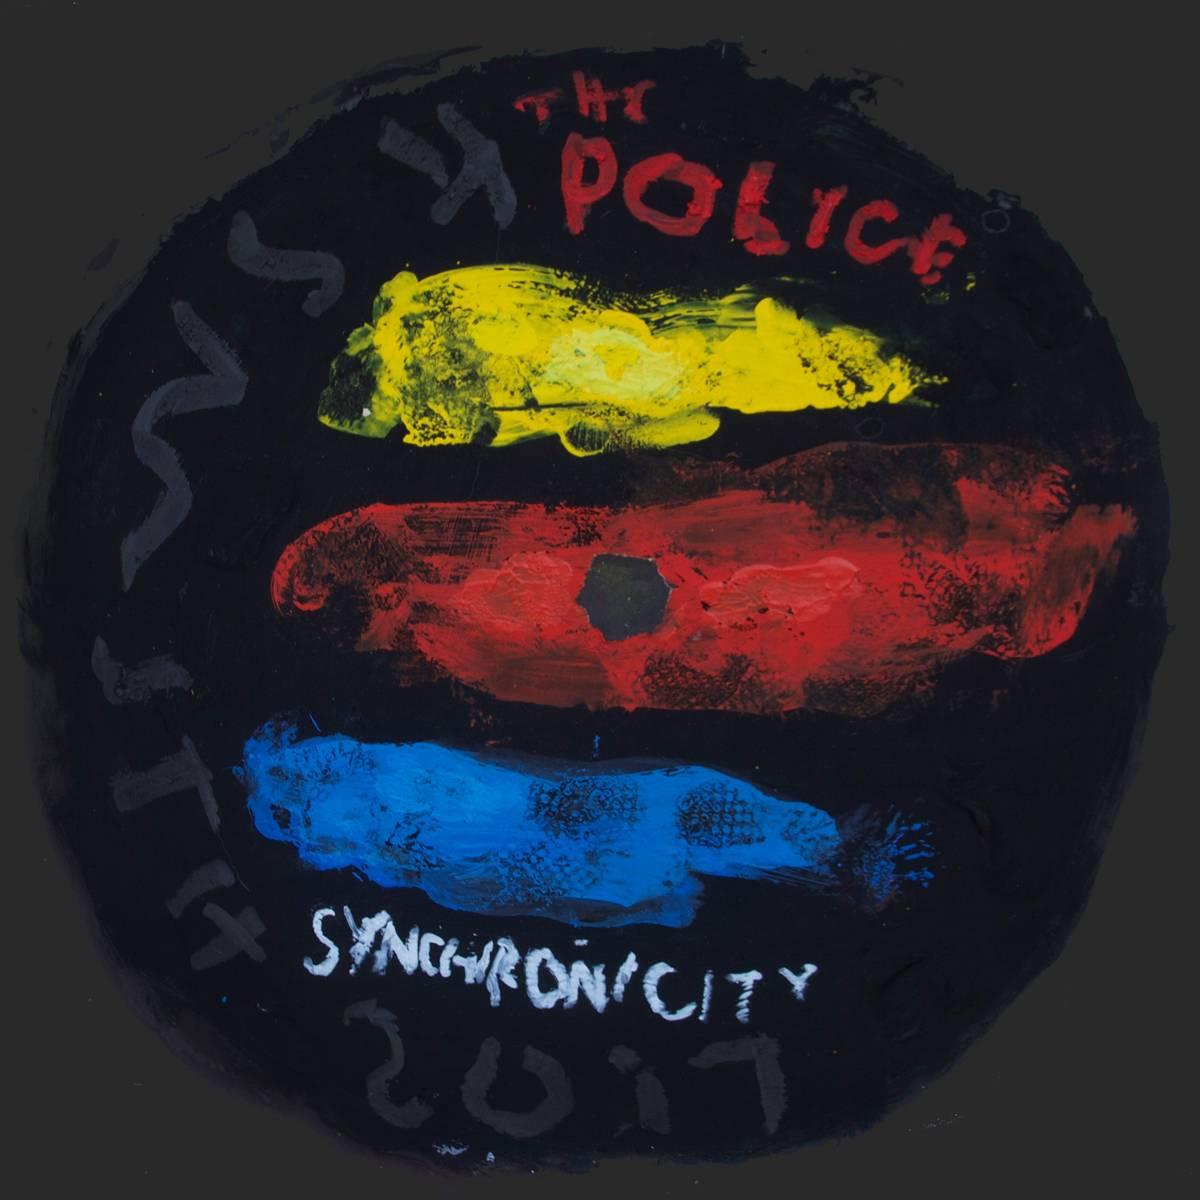 Kerry Smith Figurative Painting - Off the Record / The Police / Synchronicity